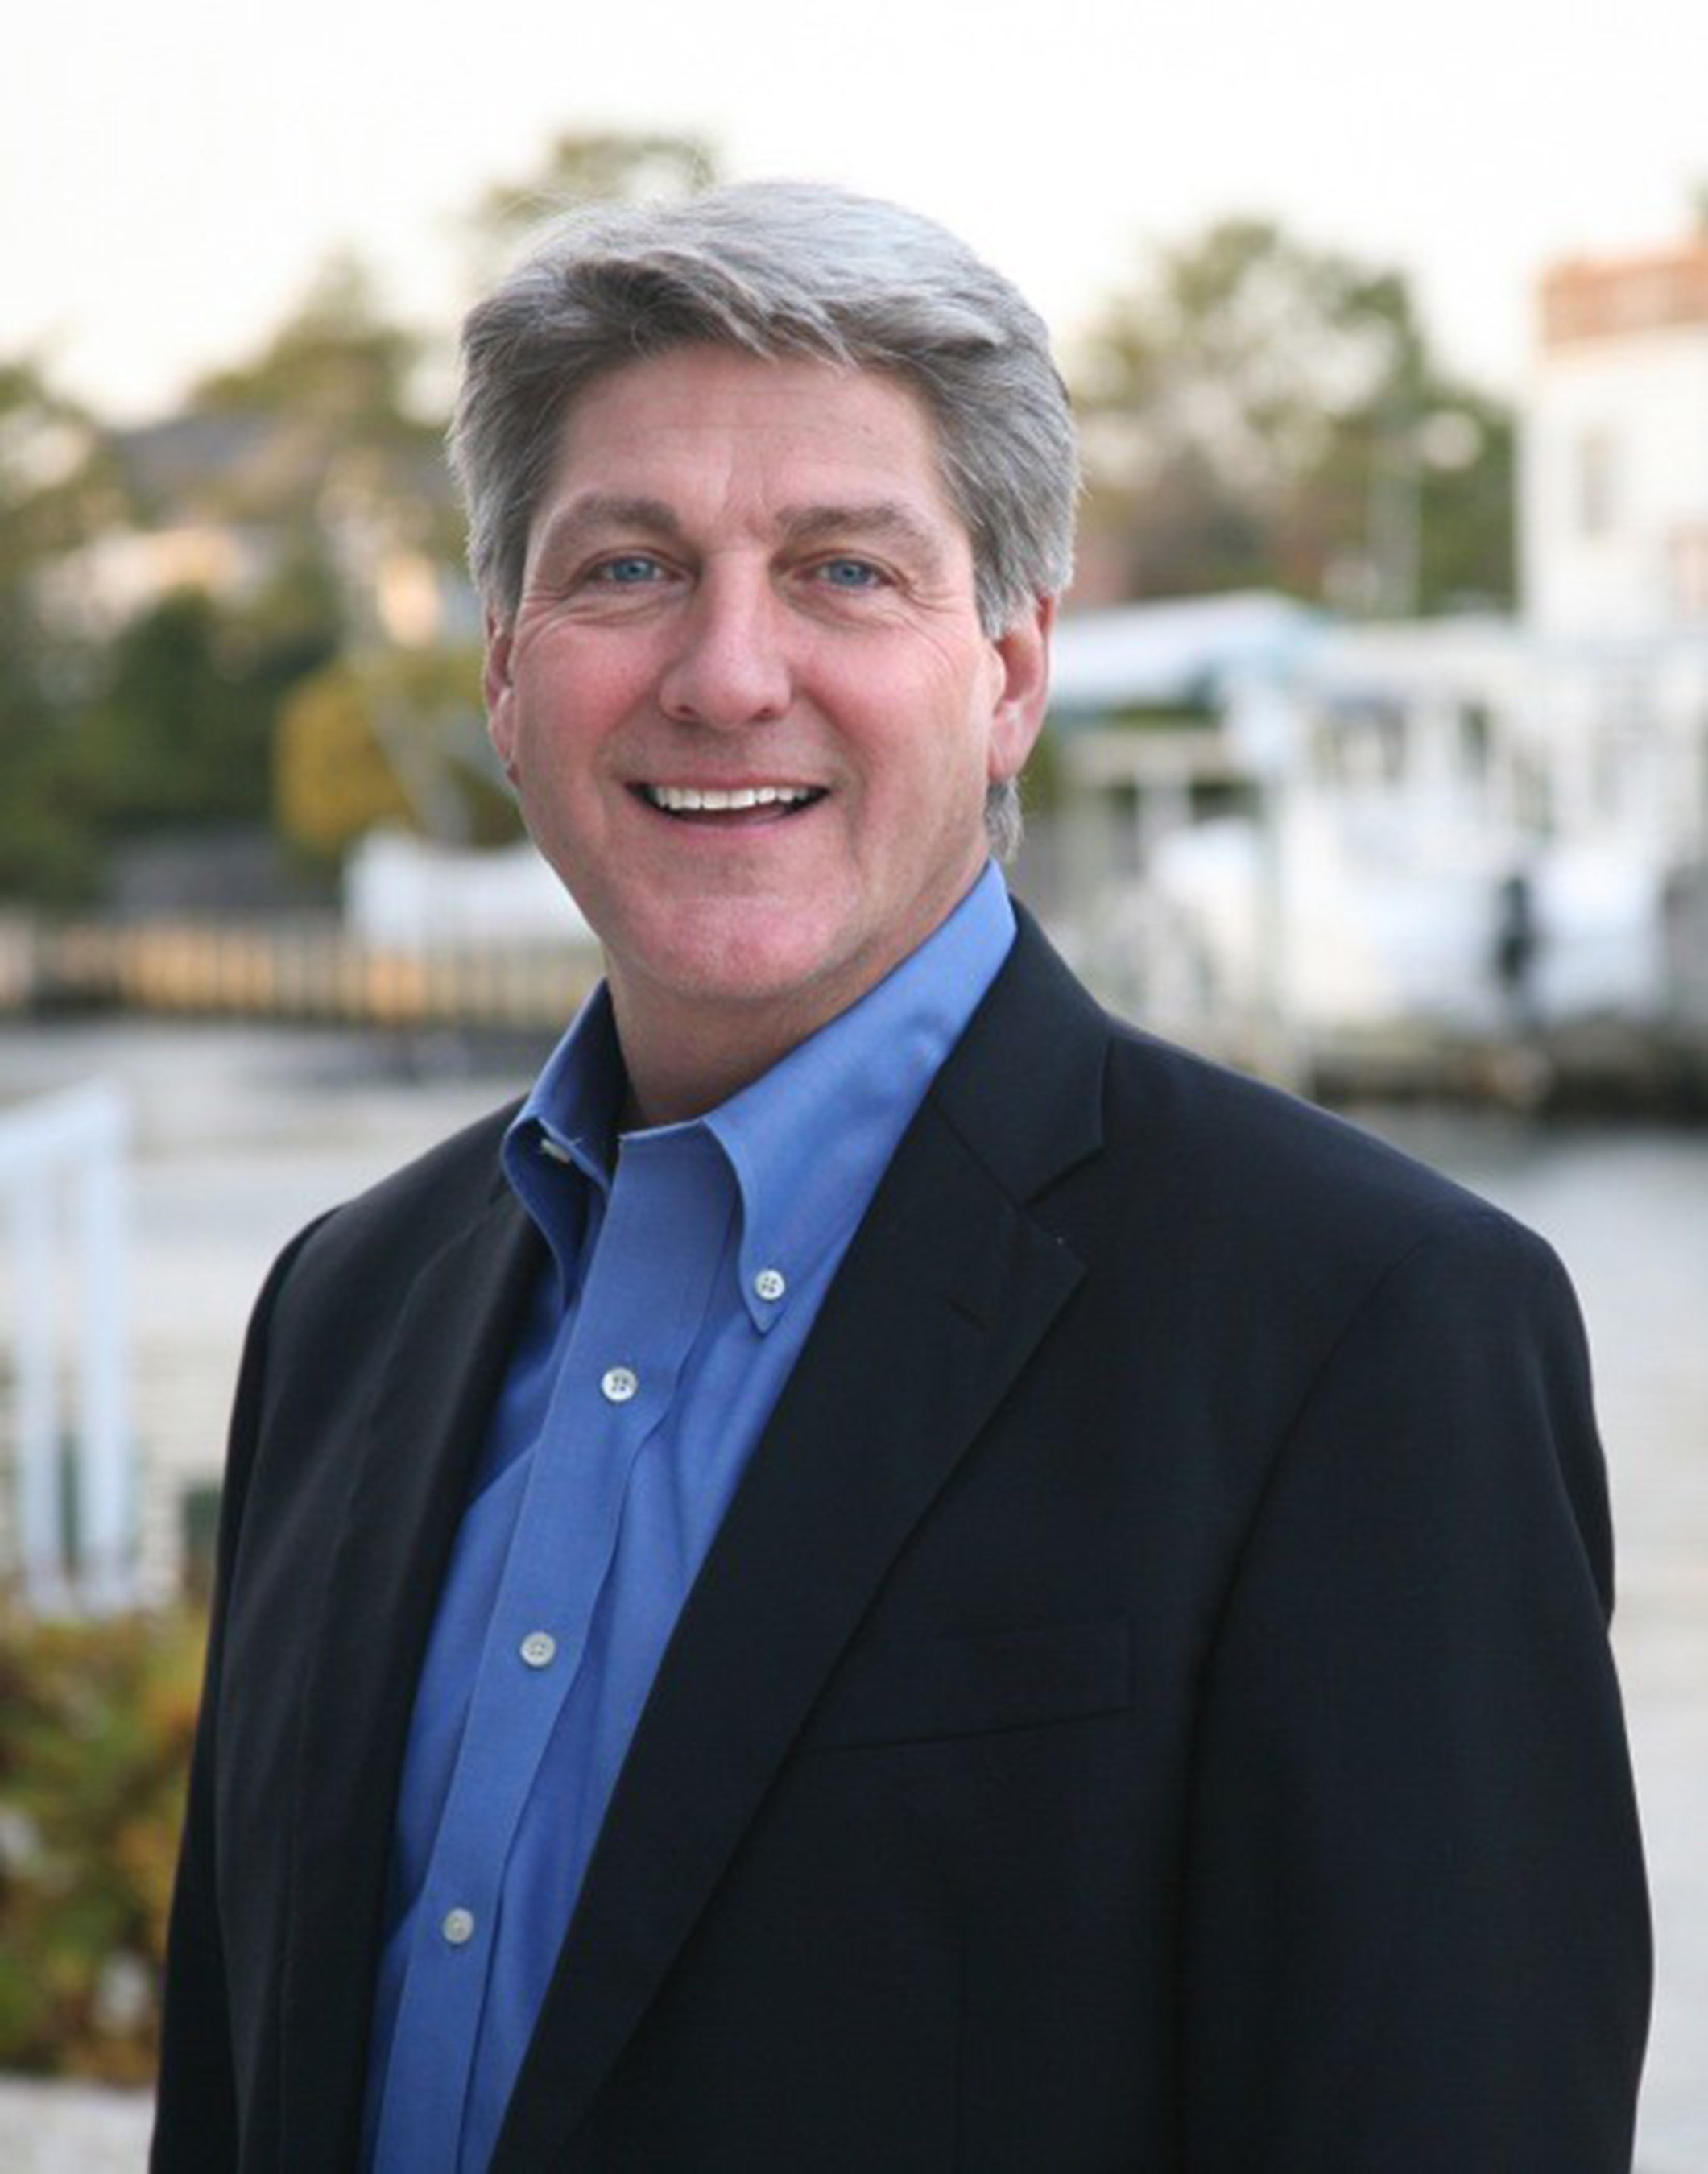 Shawn Osborne, incoming President and Chief Executive Officer of Network for Teaching Entrepreneurship